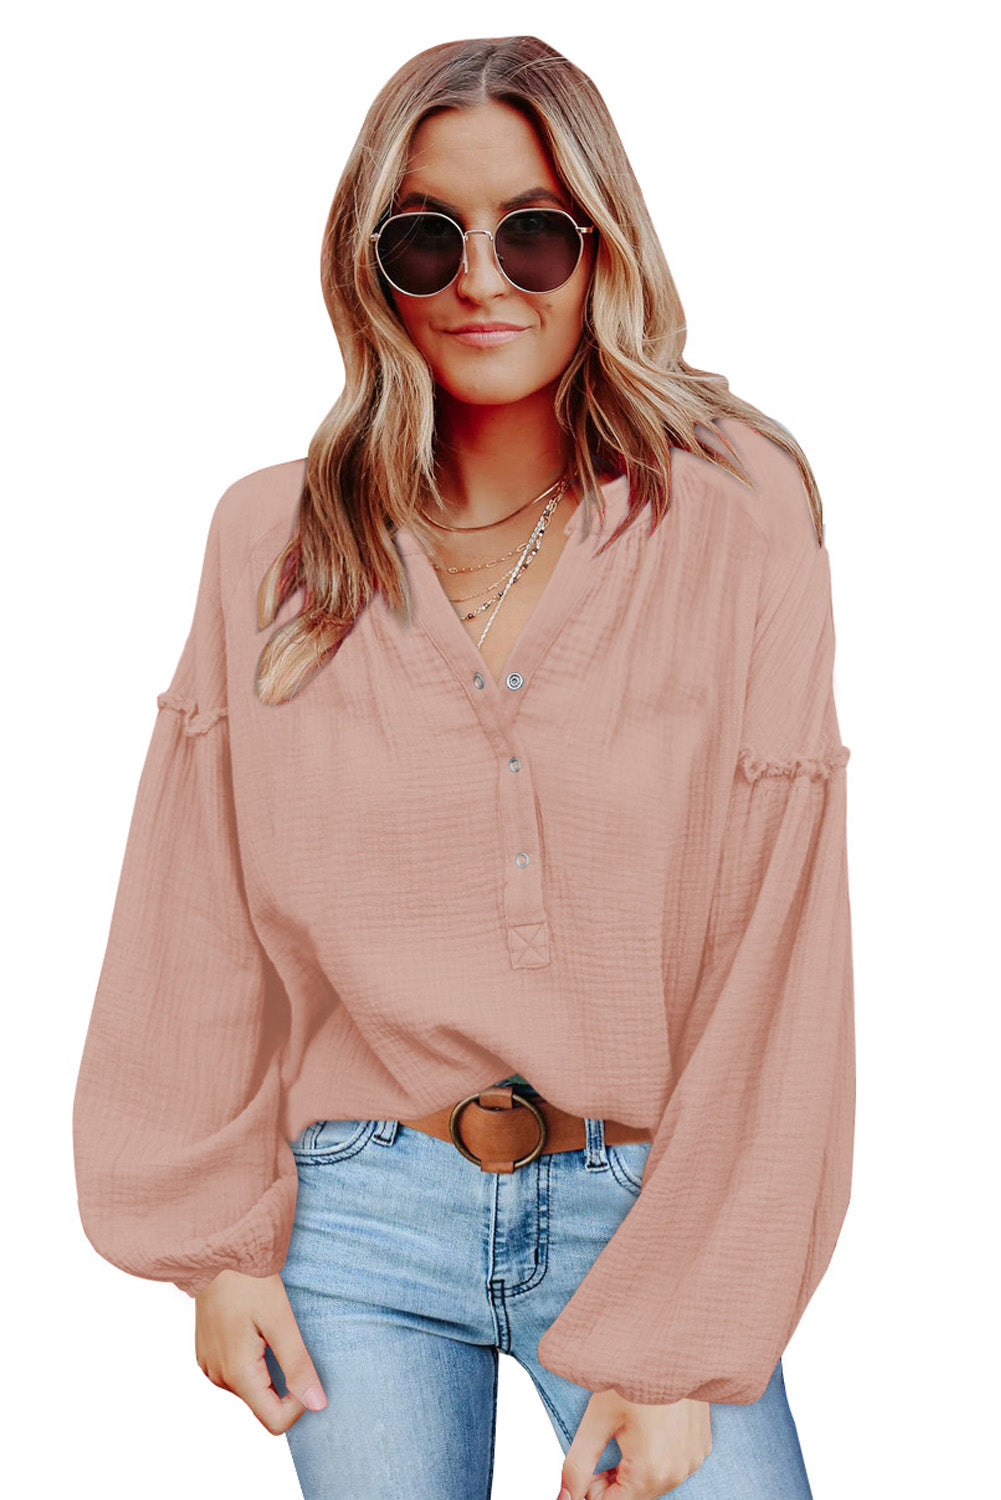 Pink Casual Balloon Sleeve Crinkled Top Long Sleeve Tops JT's Designer Fashion